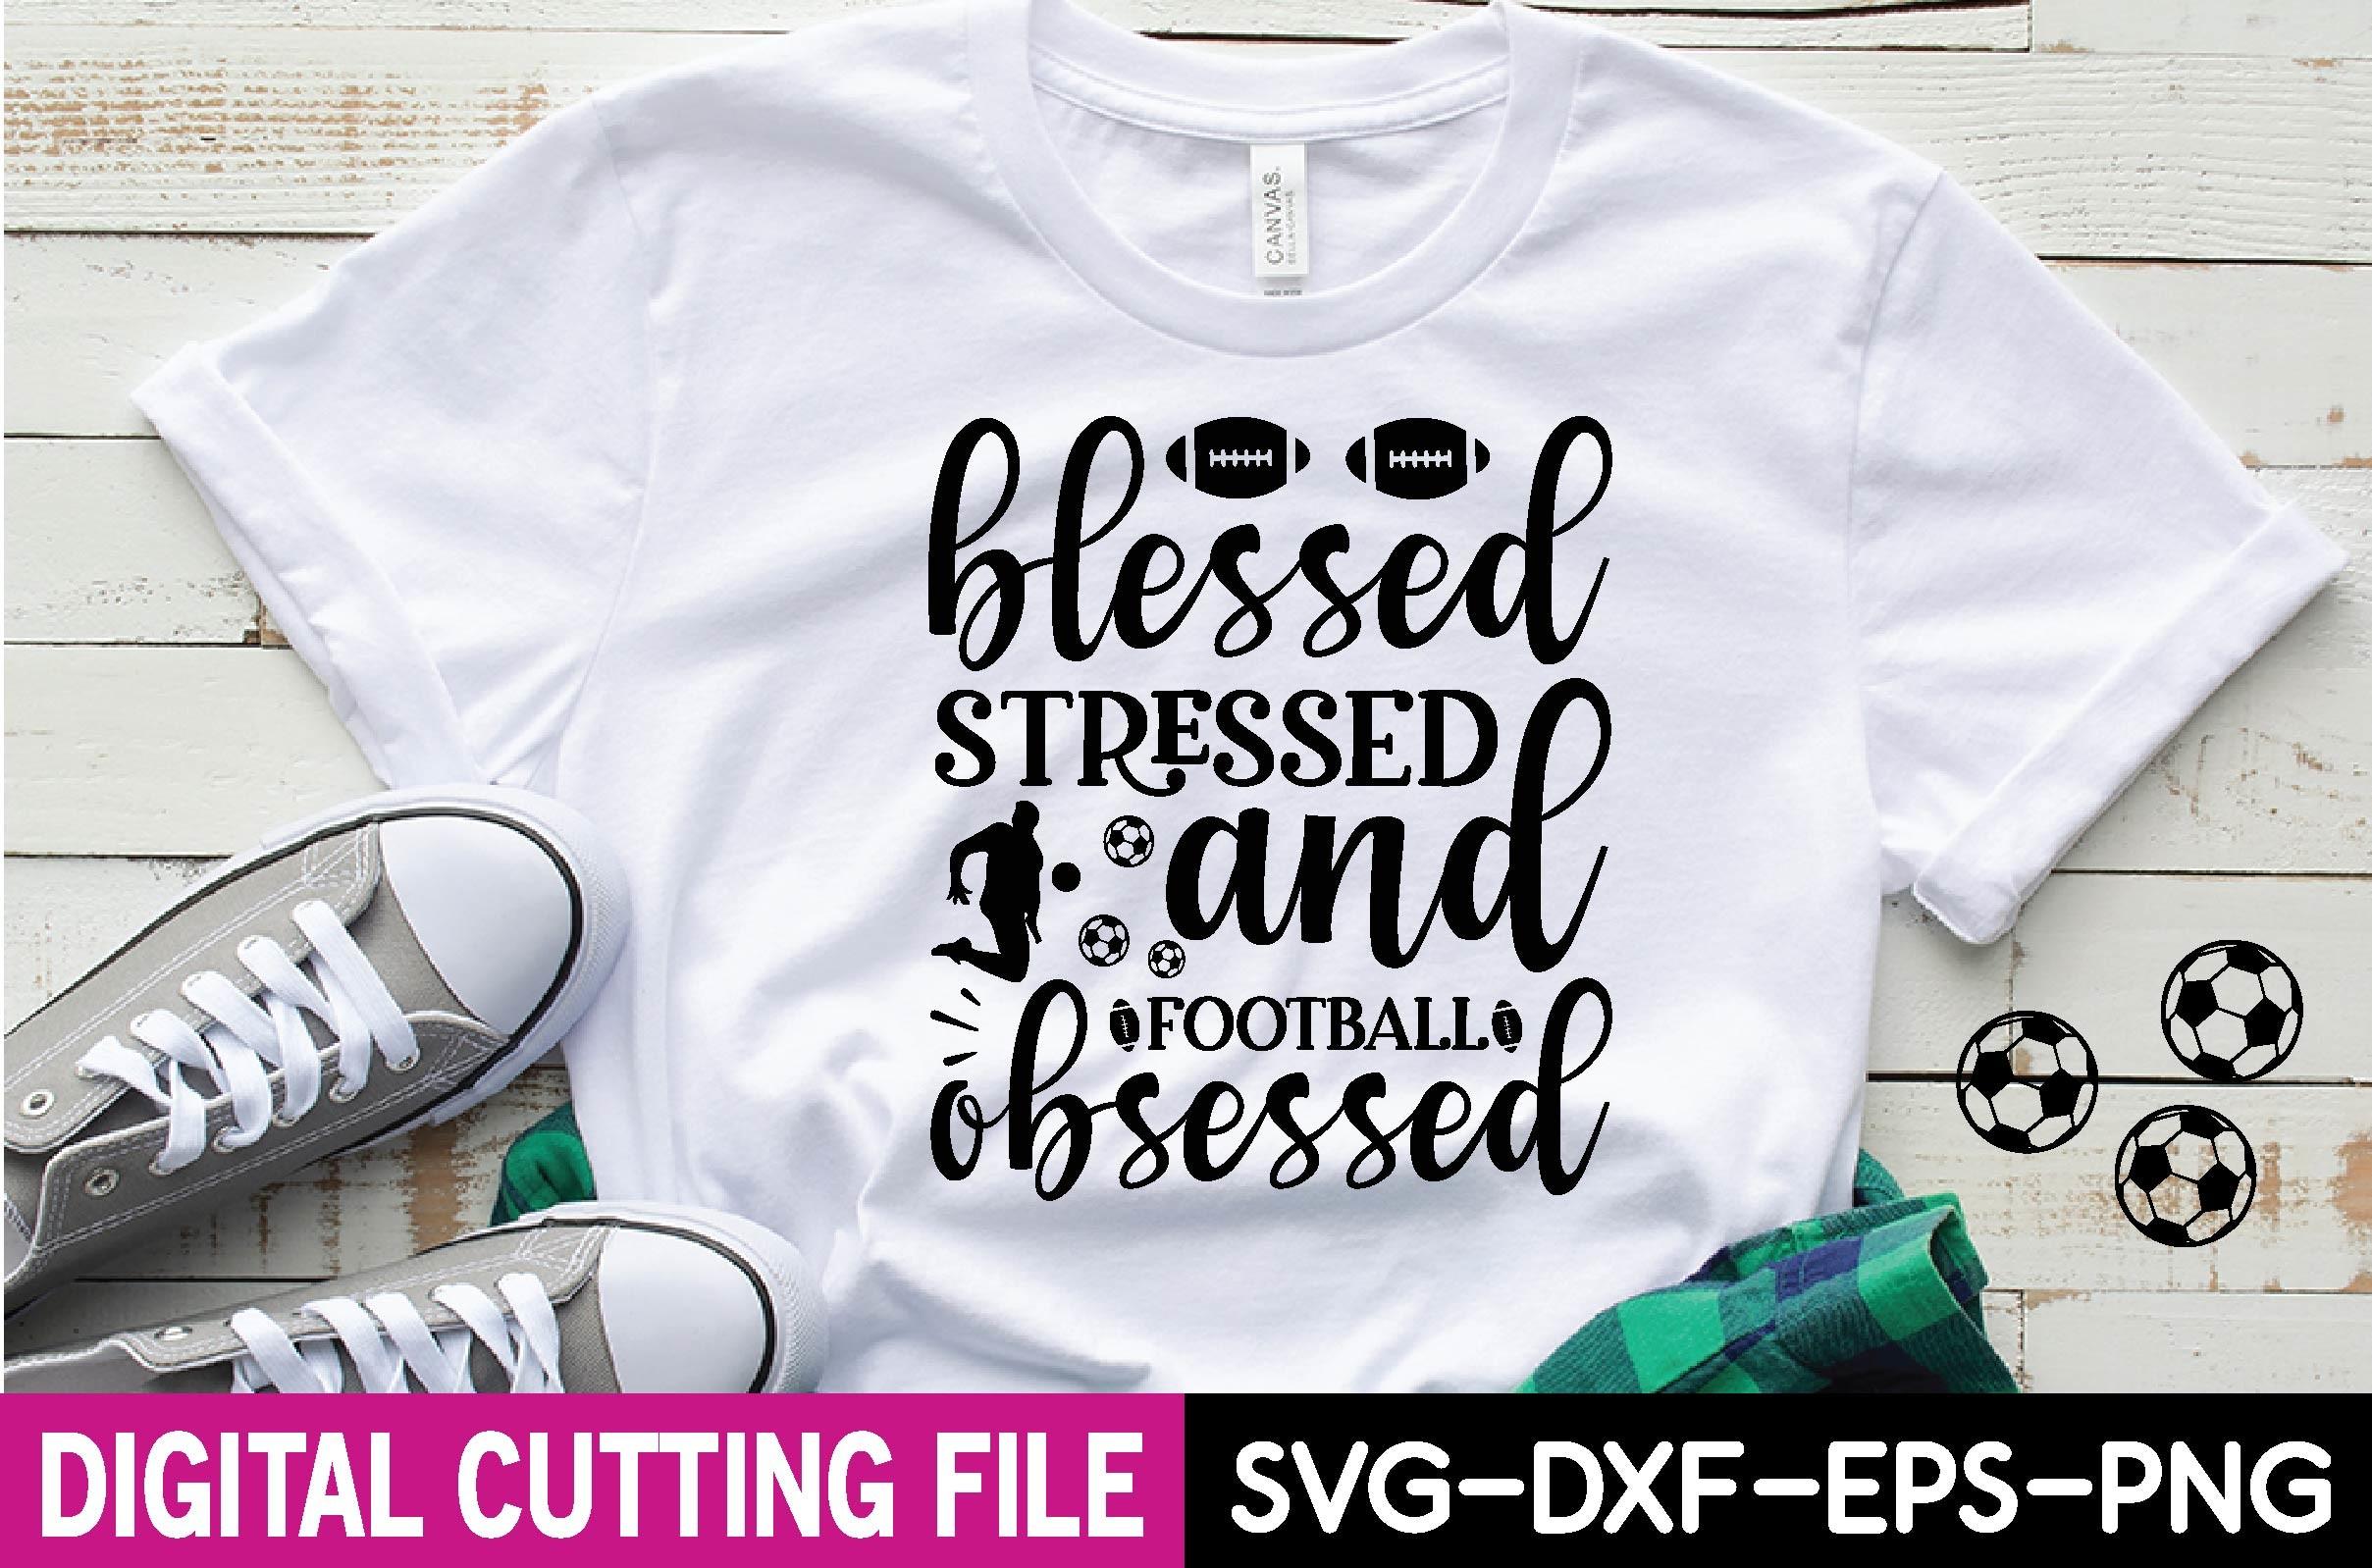 Blessed Stressed and Football Obsessed